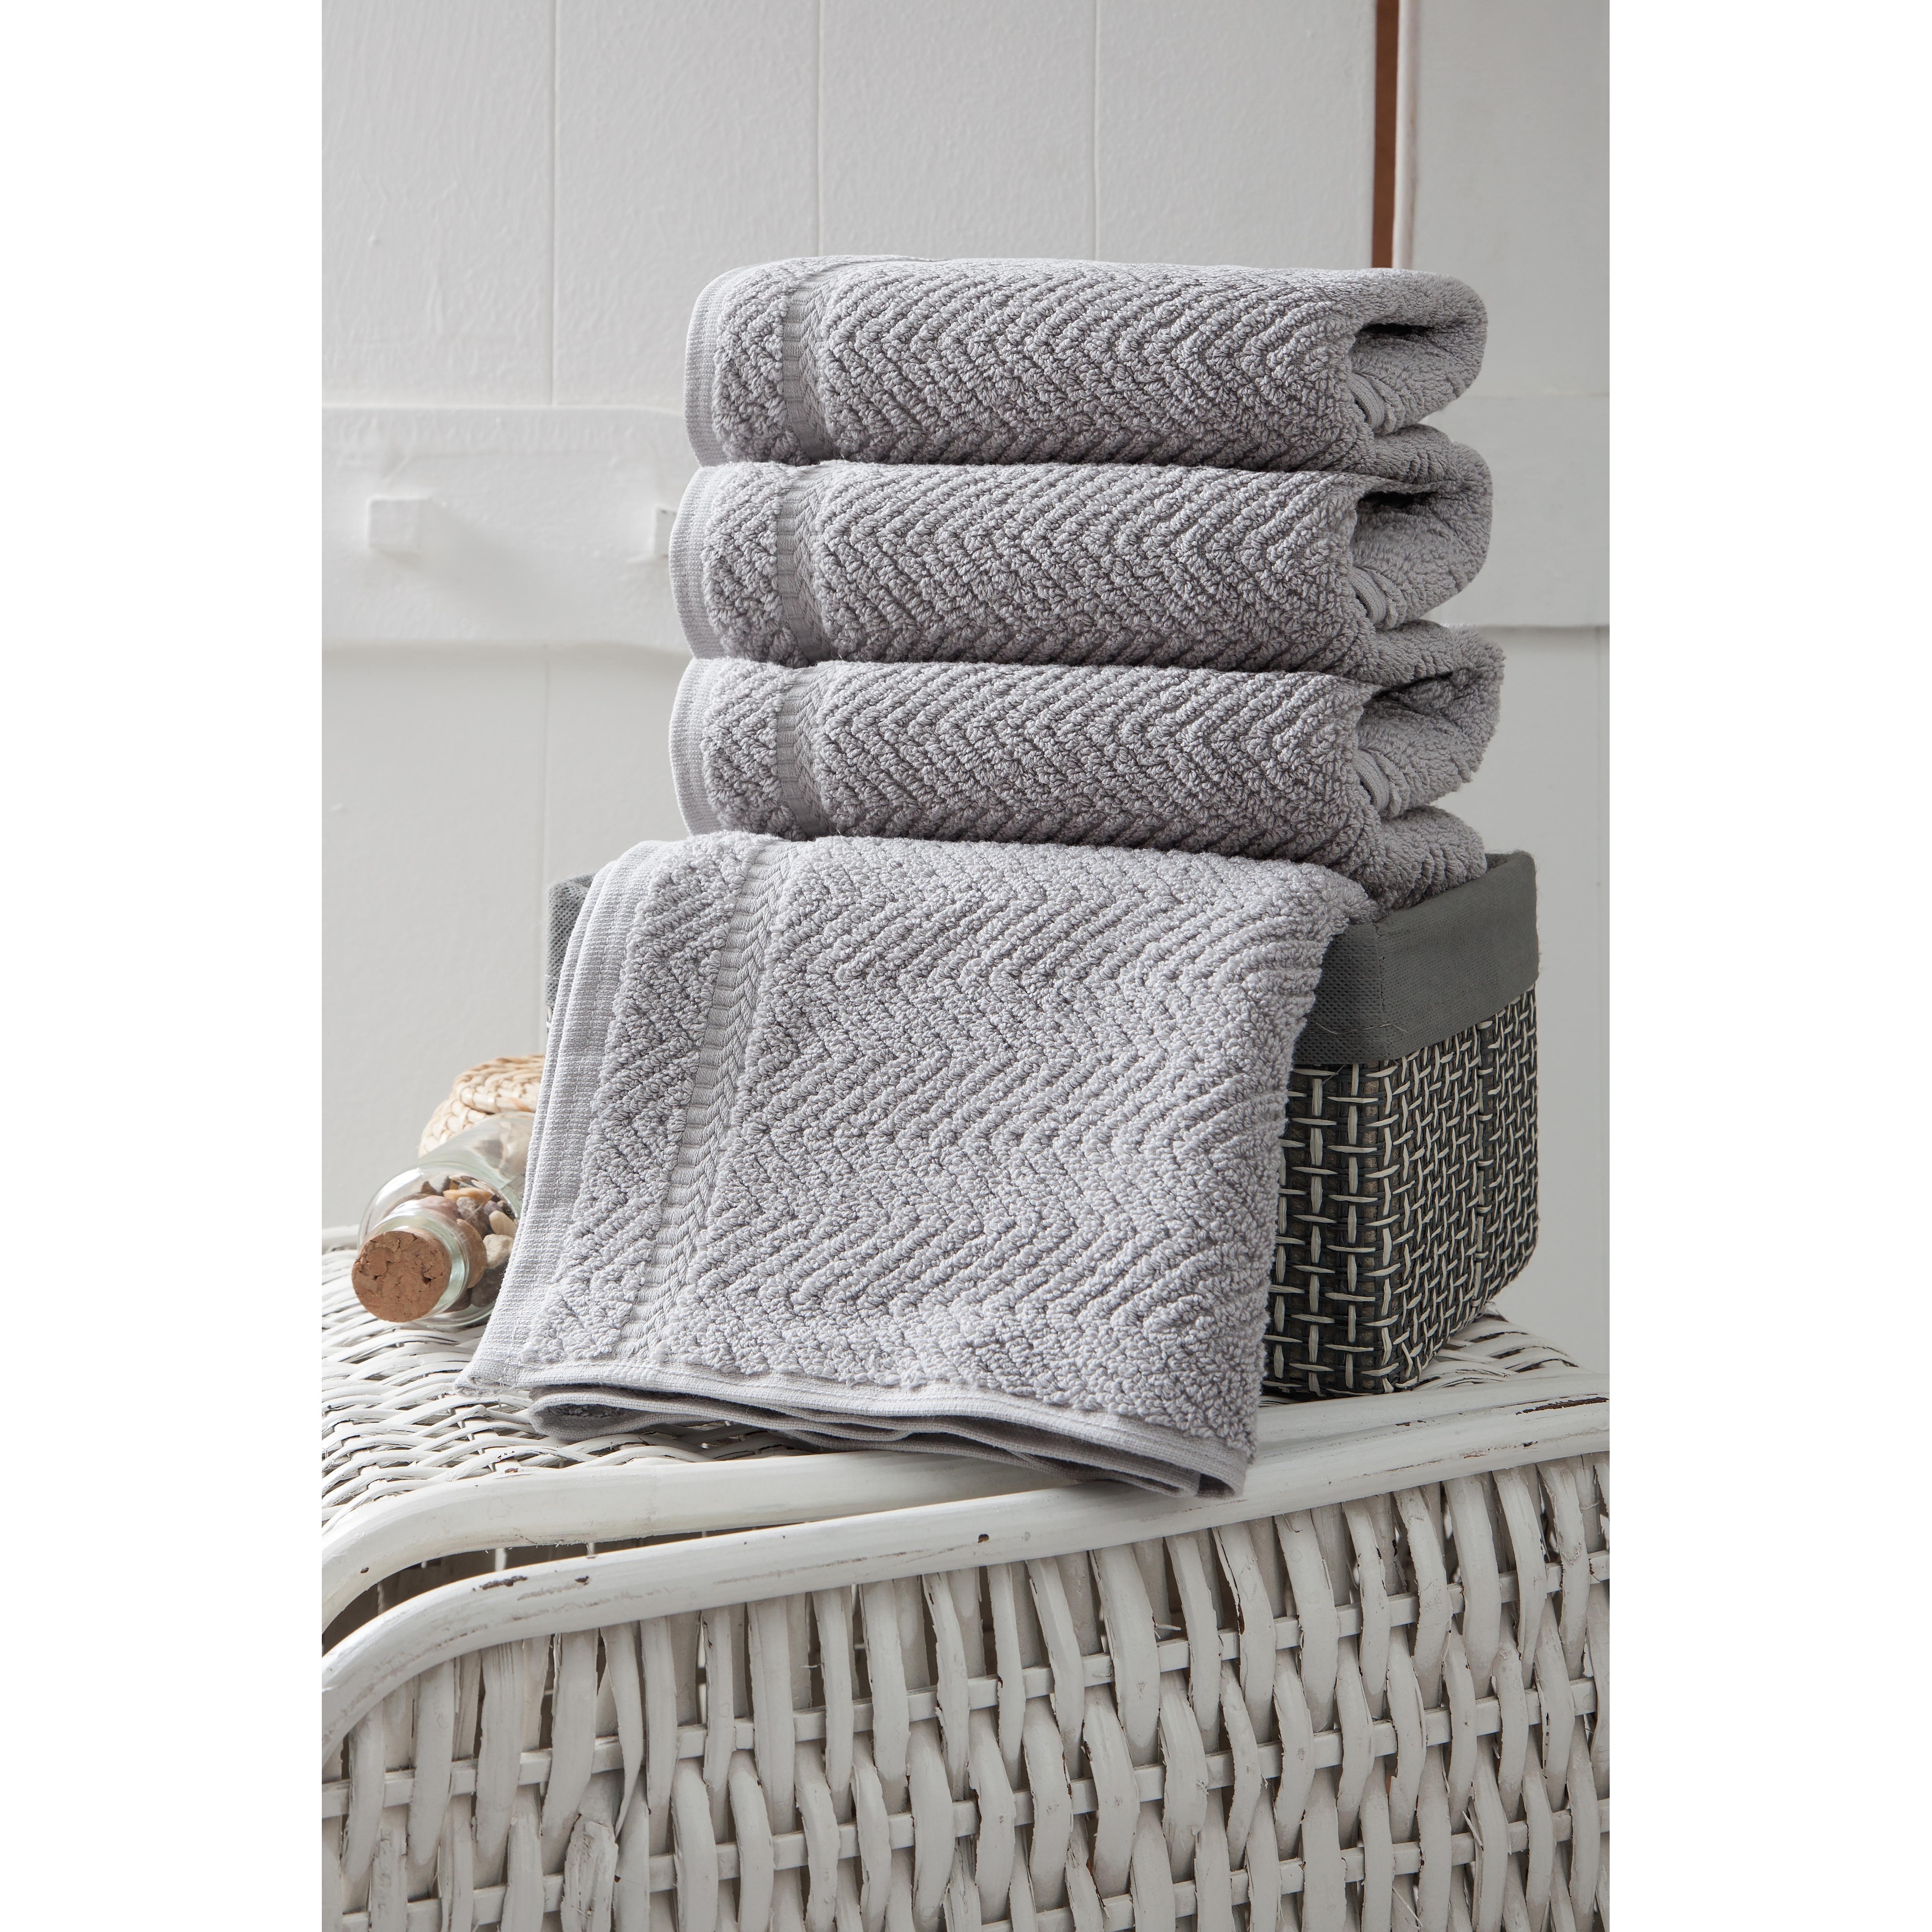 Ozan Premium Home 100% Turkish Cotton Maui Collection Luxury Hand Towels  (Set of 4) - On Sale - Bed Bath & Beyond - 32912842